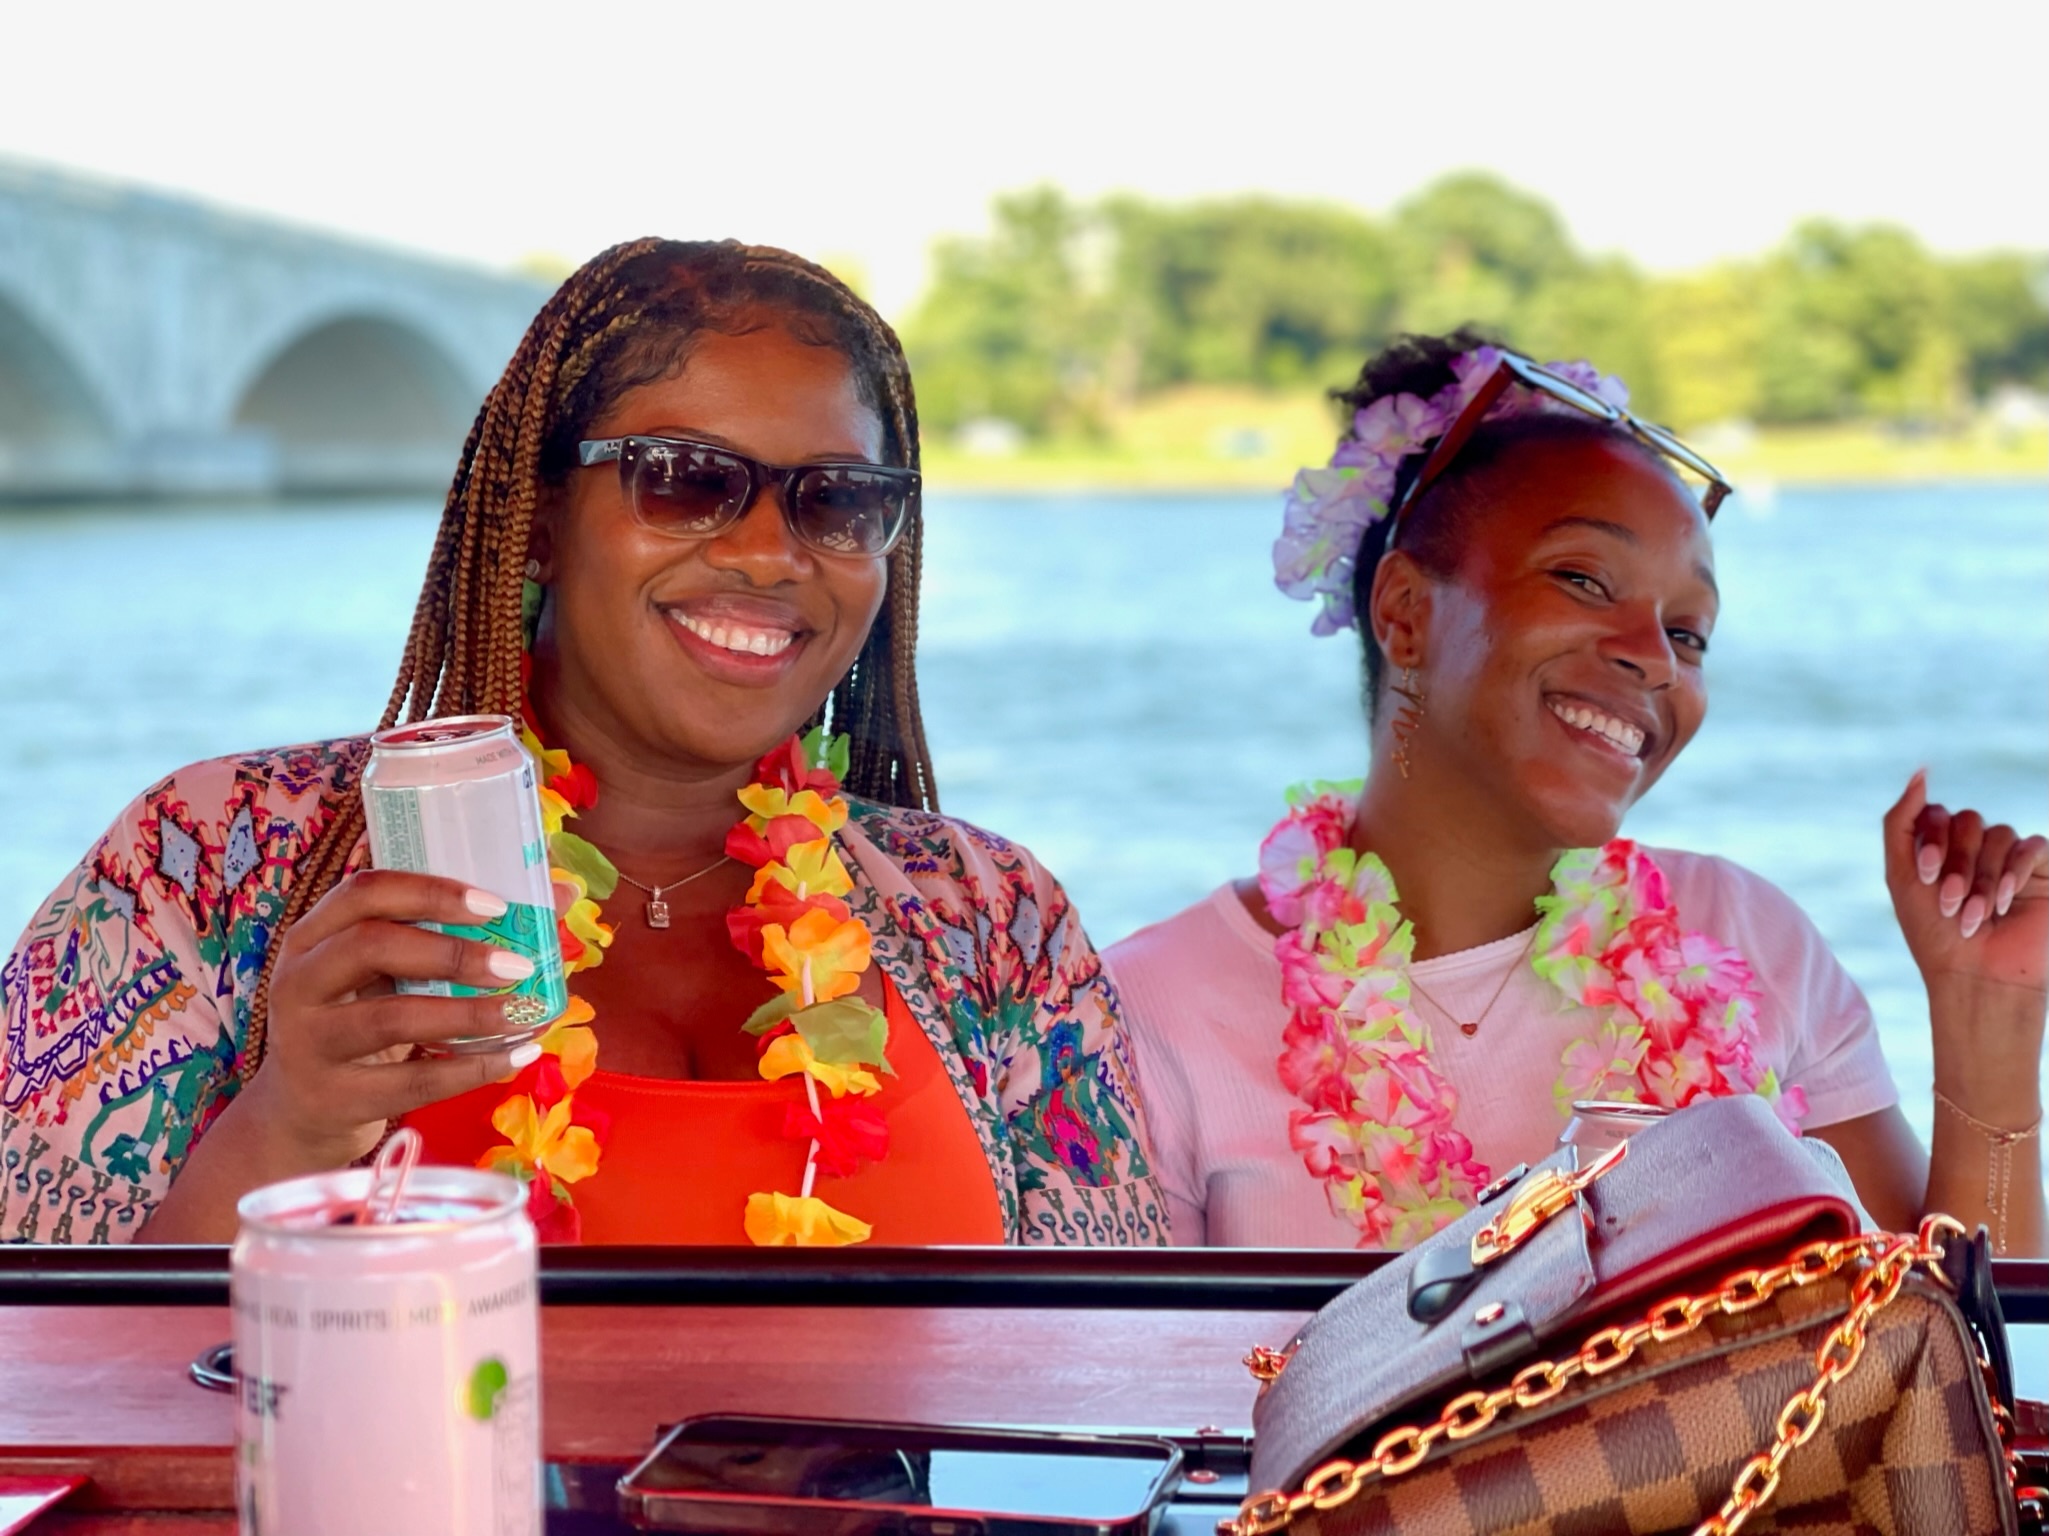 Georgetown Paddle Boat Booze Cruises: BYOB Plus Drinks & Snacks Sold Onboard image 2